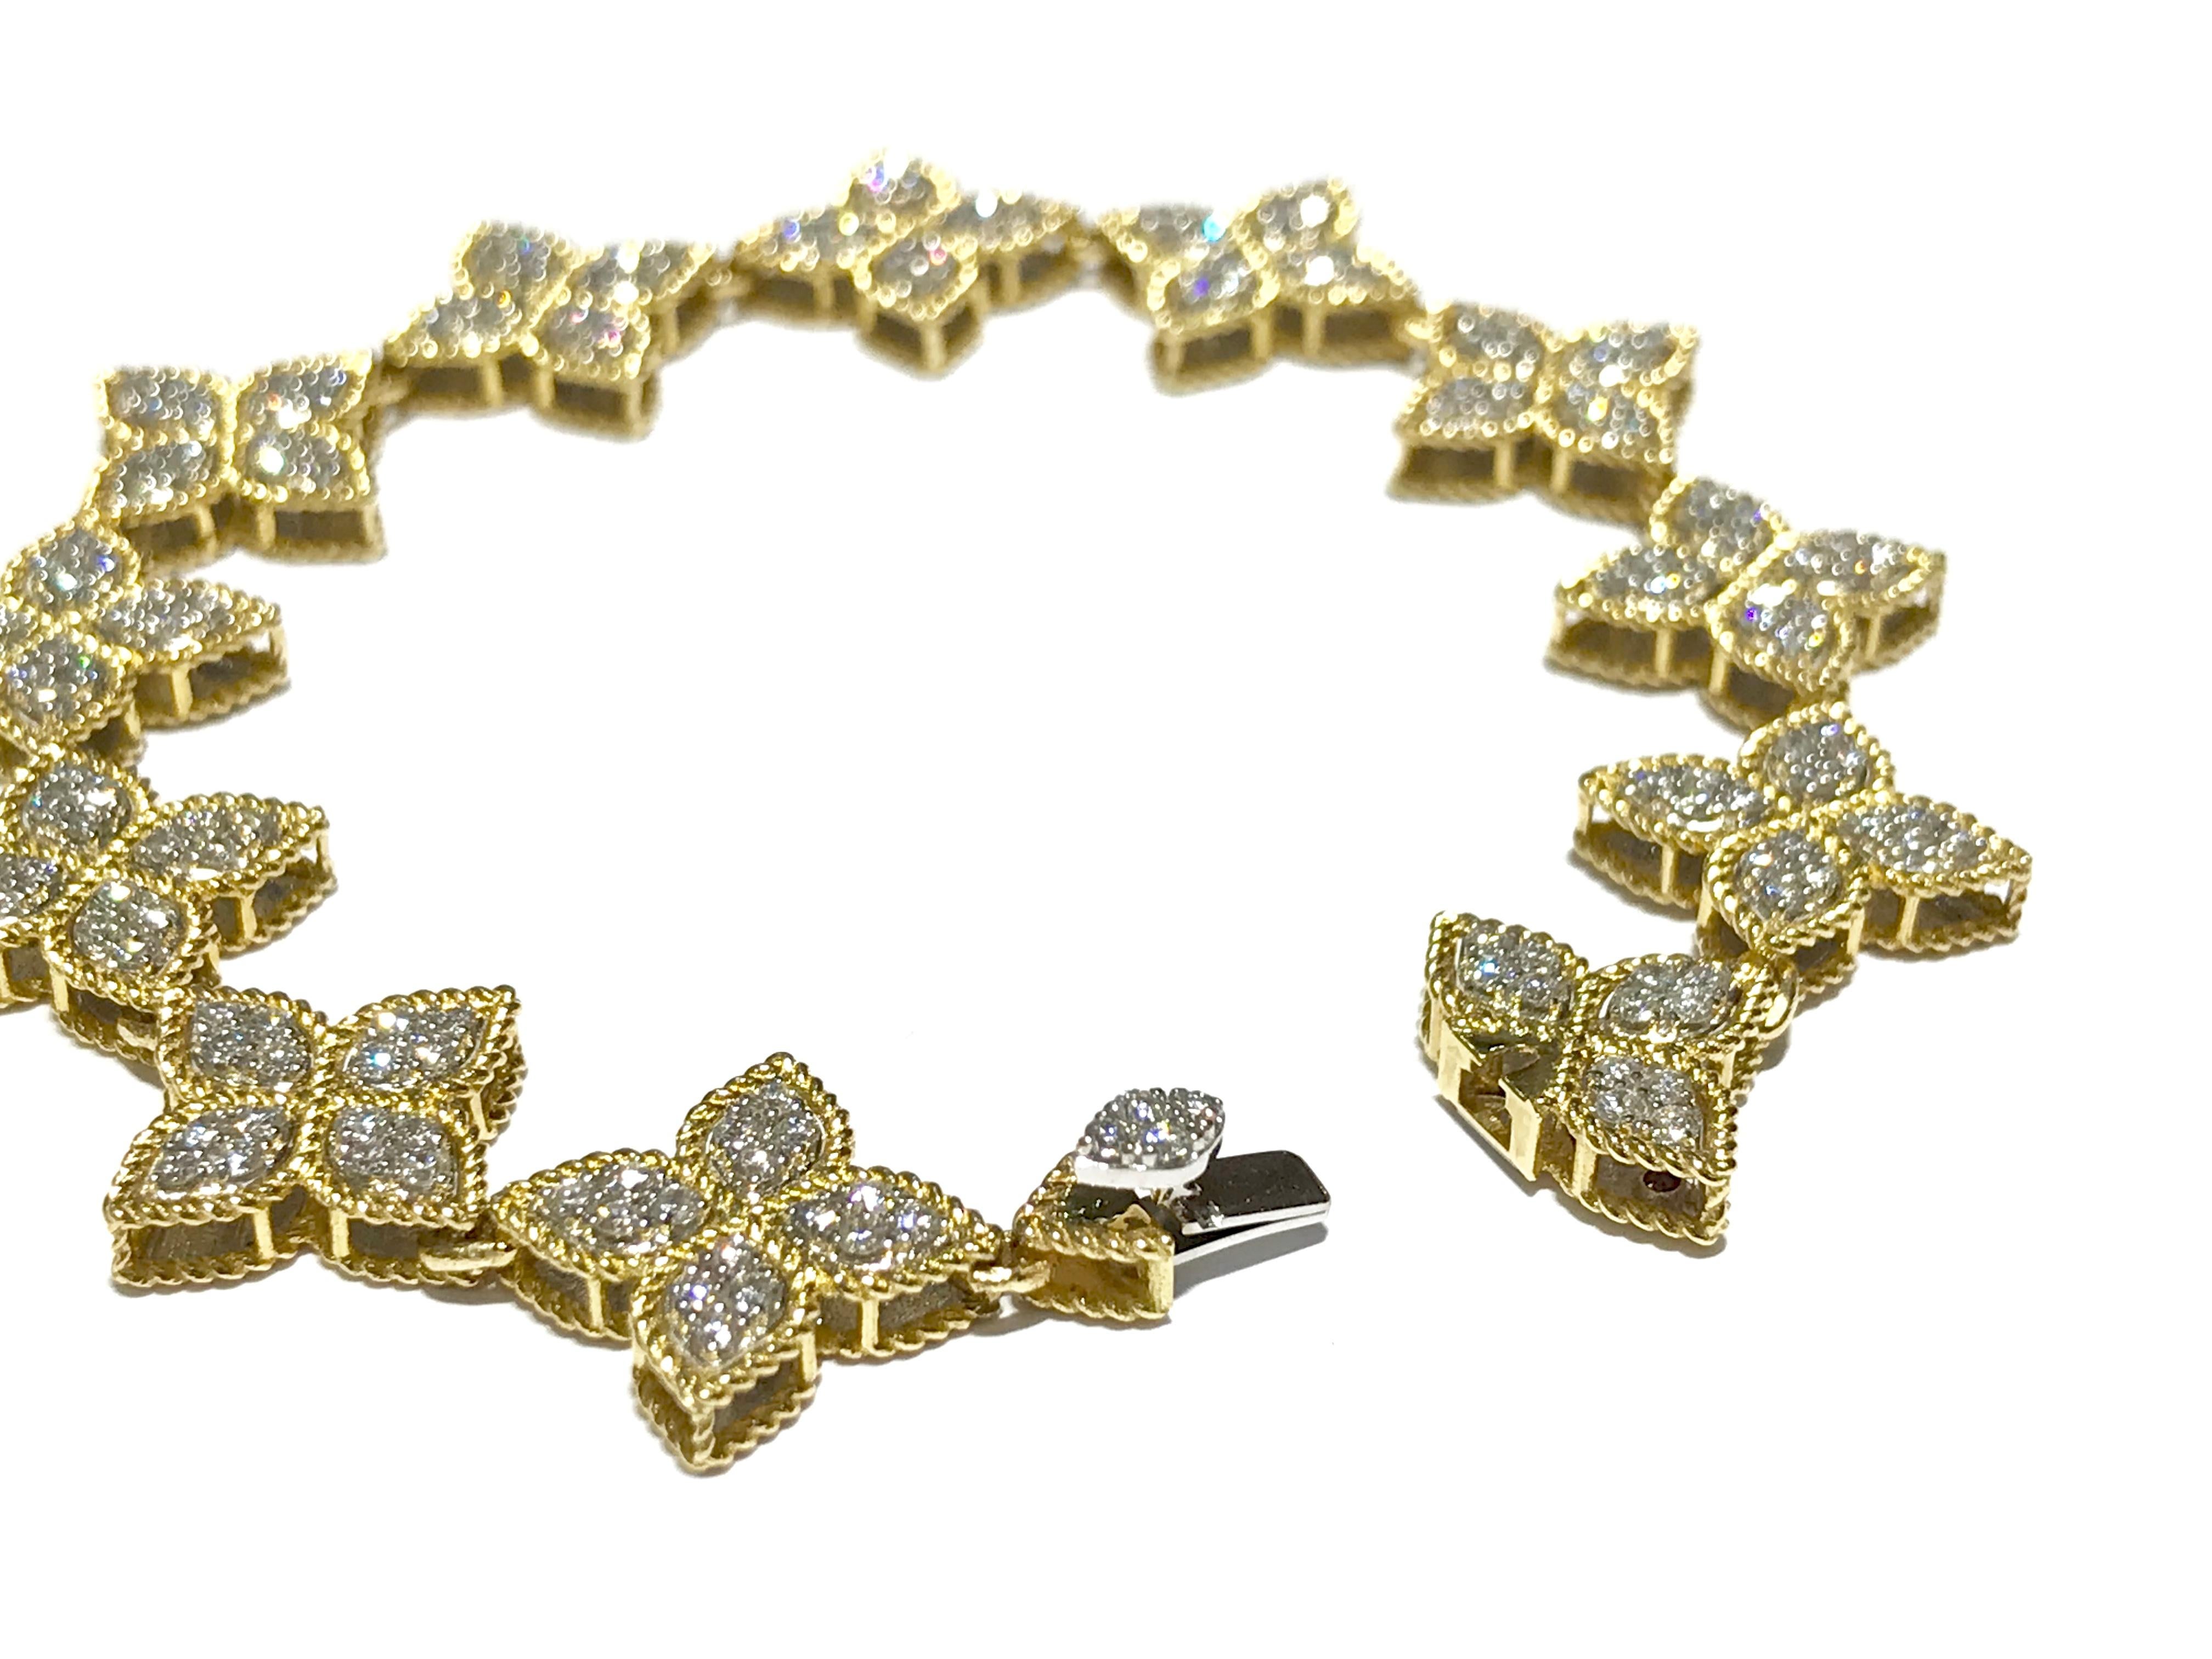 The Wide Link Bracelet from the Roberto Coin Princess Flower collection, style number 7771382AJLBX. Set in 18k Yellow Gold and 18k White Gold this delicate Bracelet will accompany your every gesture with brilliance.
2.25 ct Diamonds with one Ruby